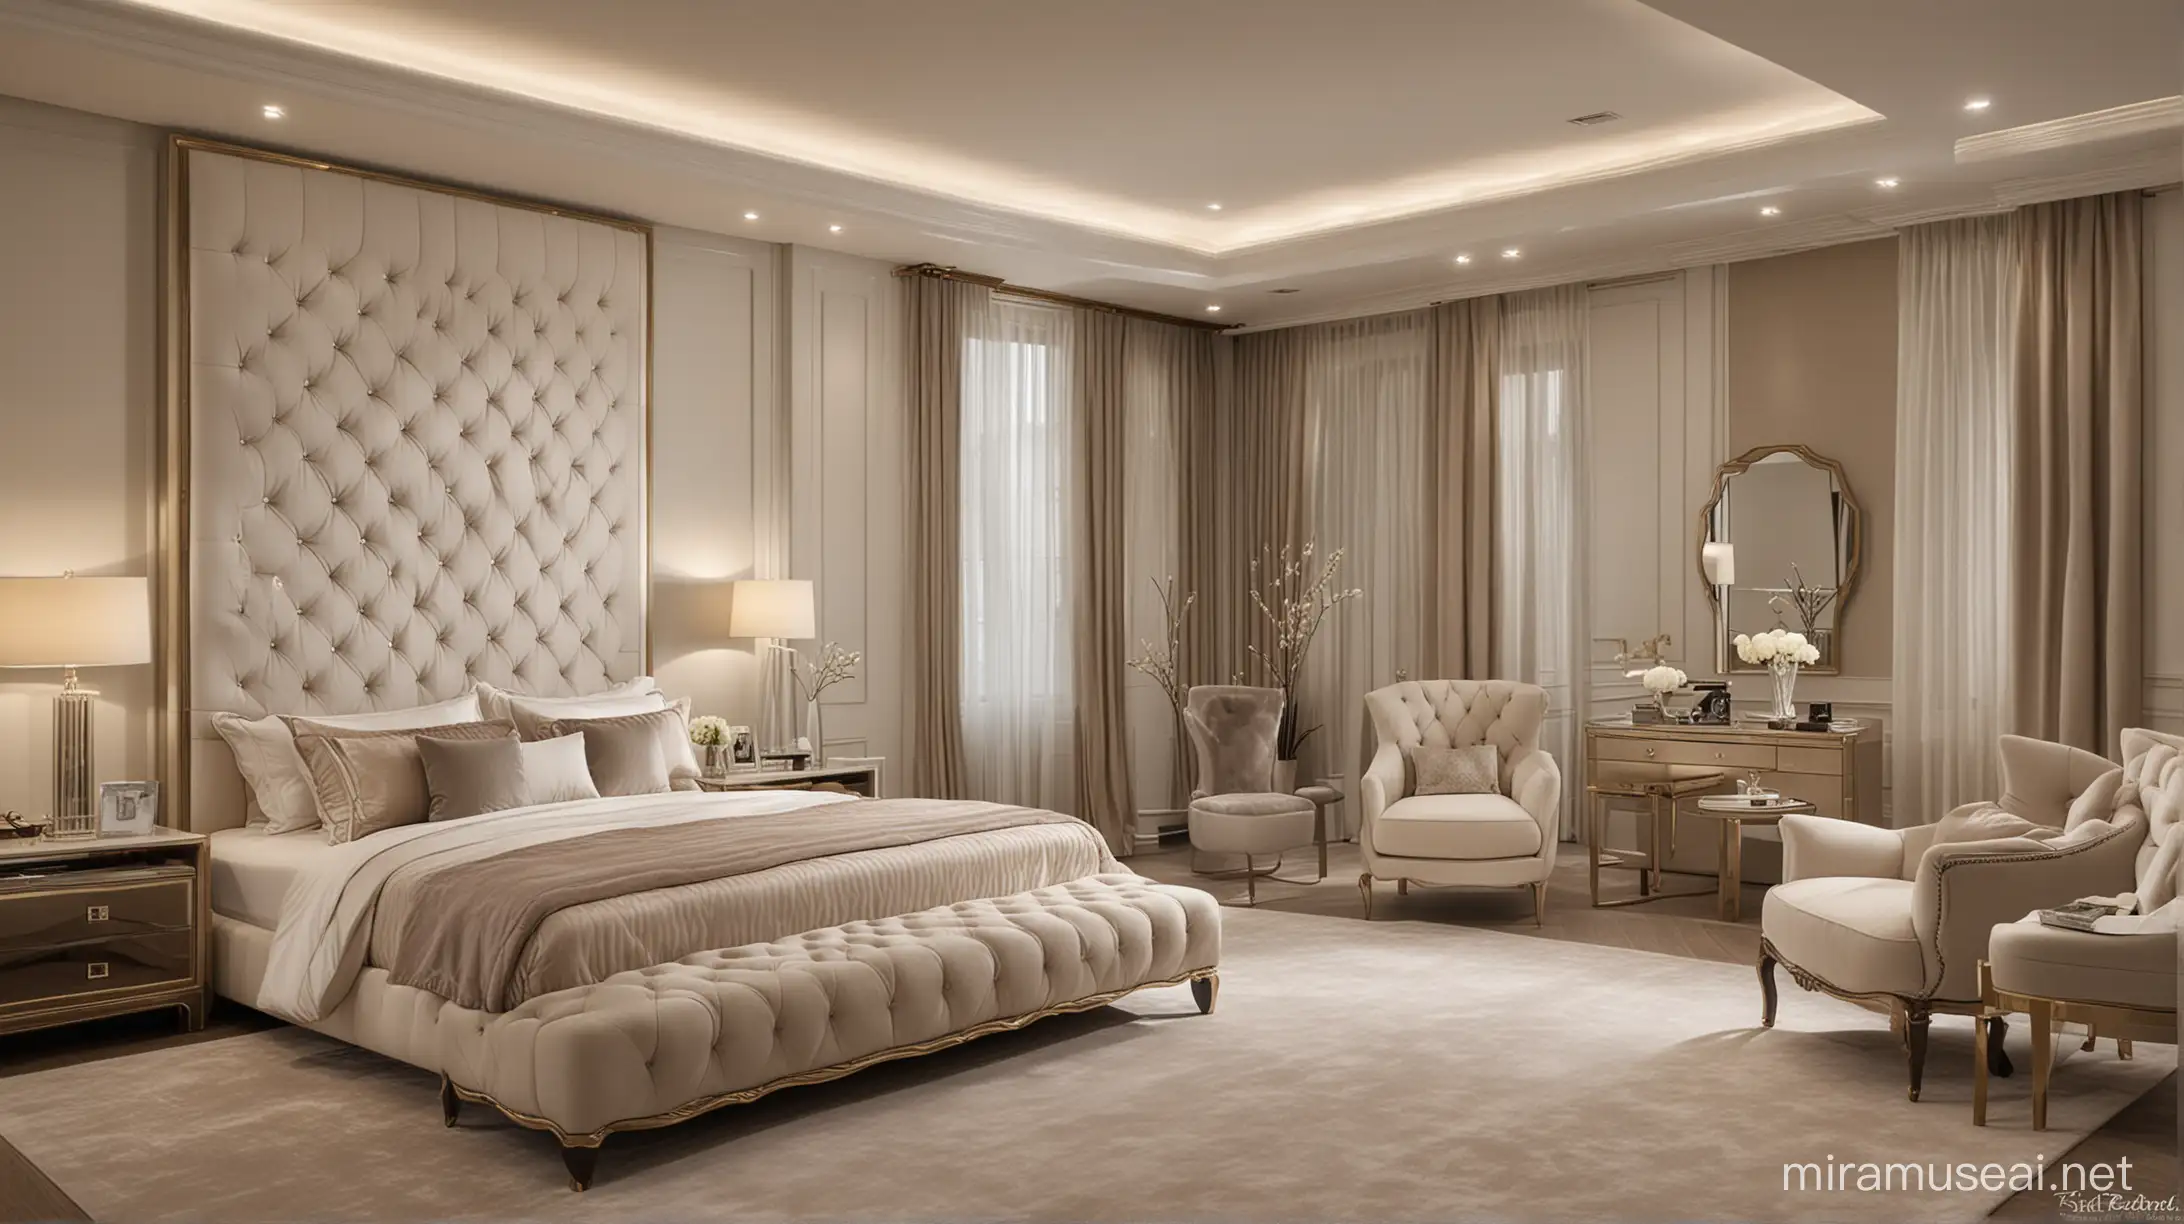 Luxurious Bedroom with HighEnd Furniture and Artistic Photography